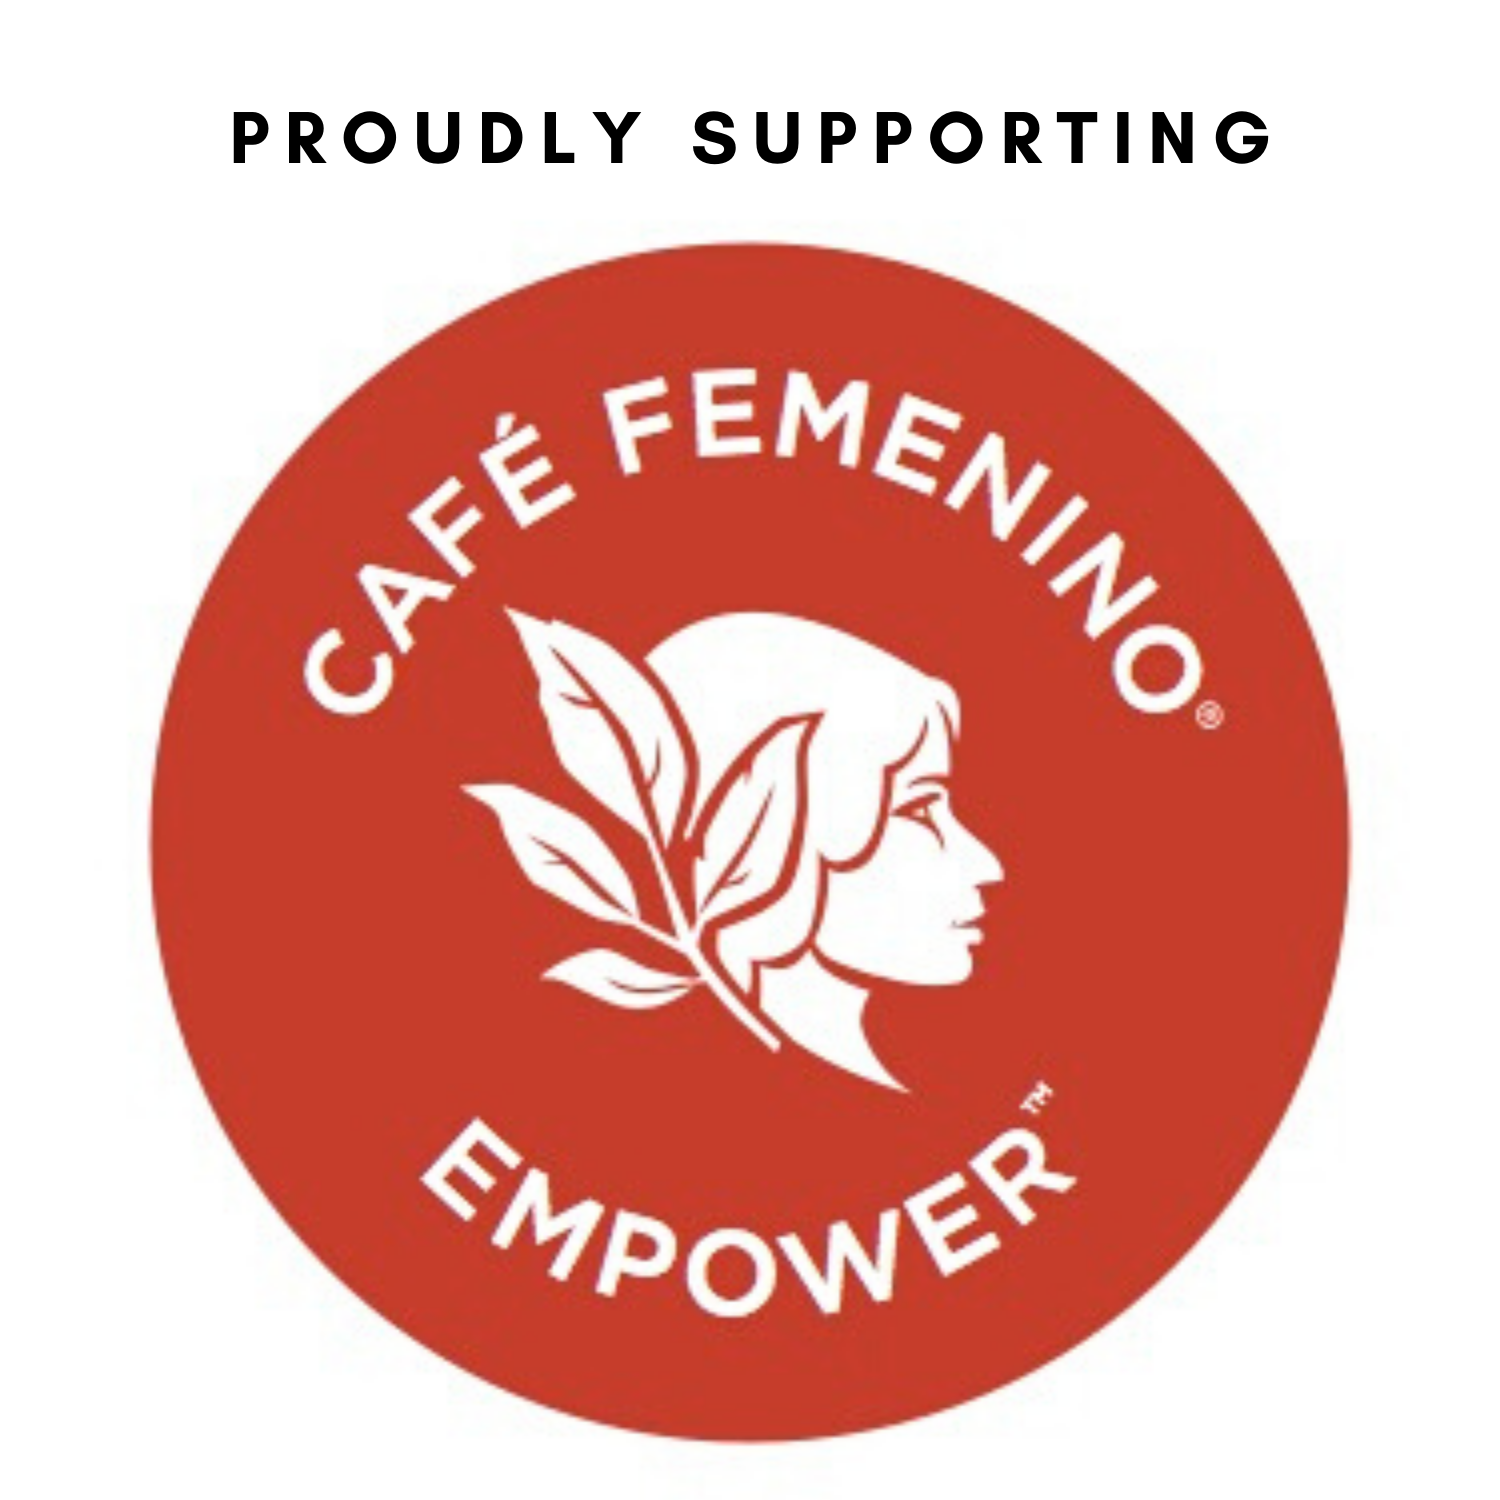 We at Tiny Footprint Coffee are proud to support Café Femenino by bringing our customers their quality product, spreading the word of their movement, and featuring their logo on every bag.